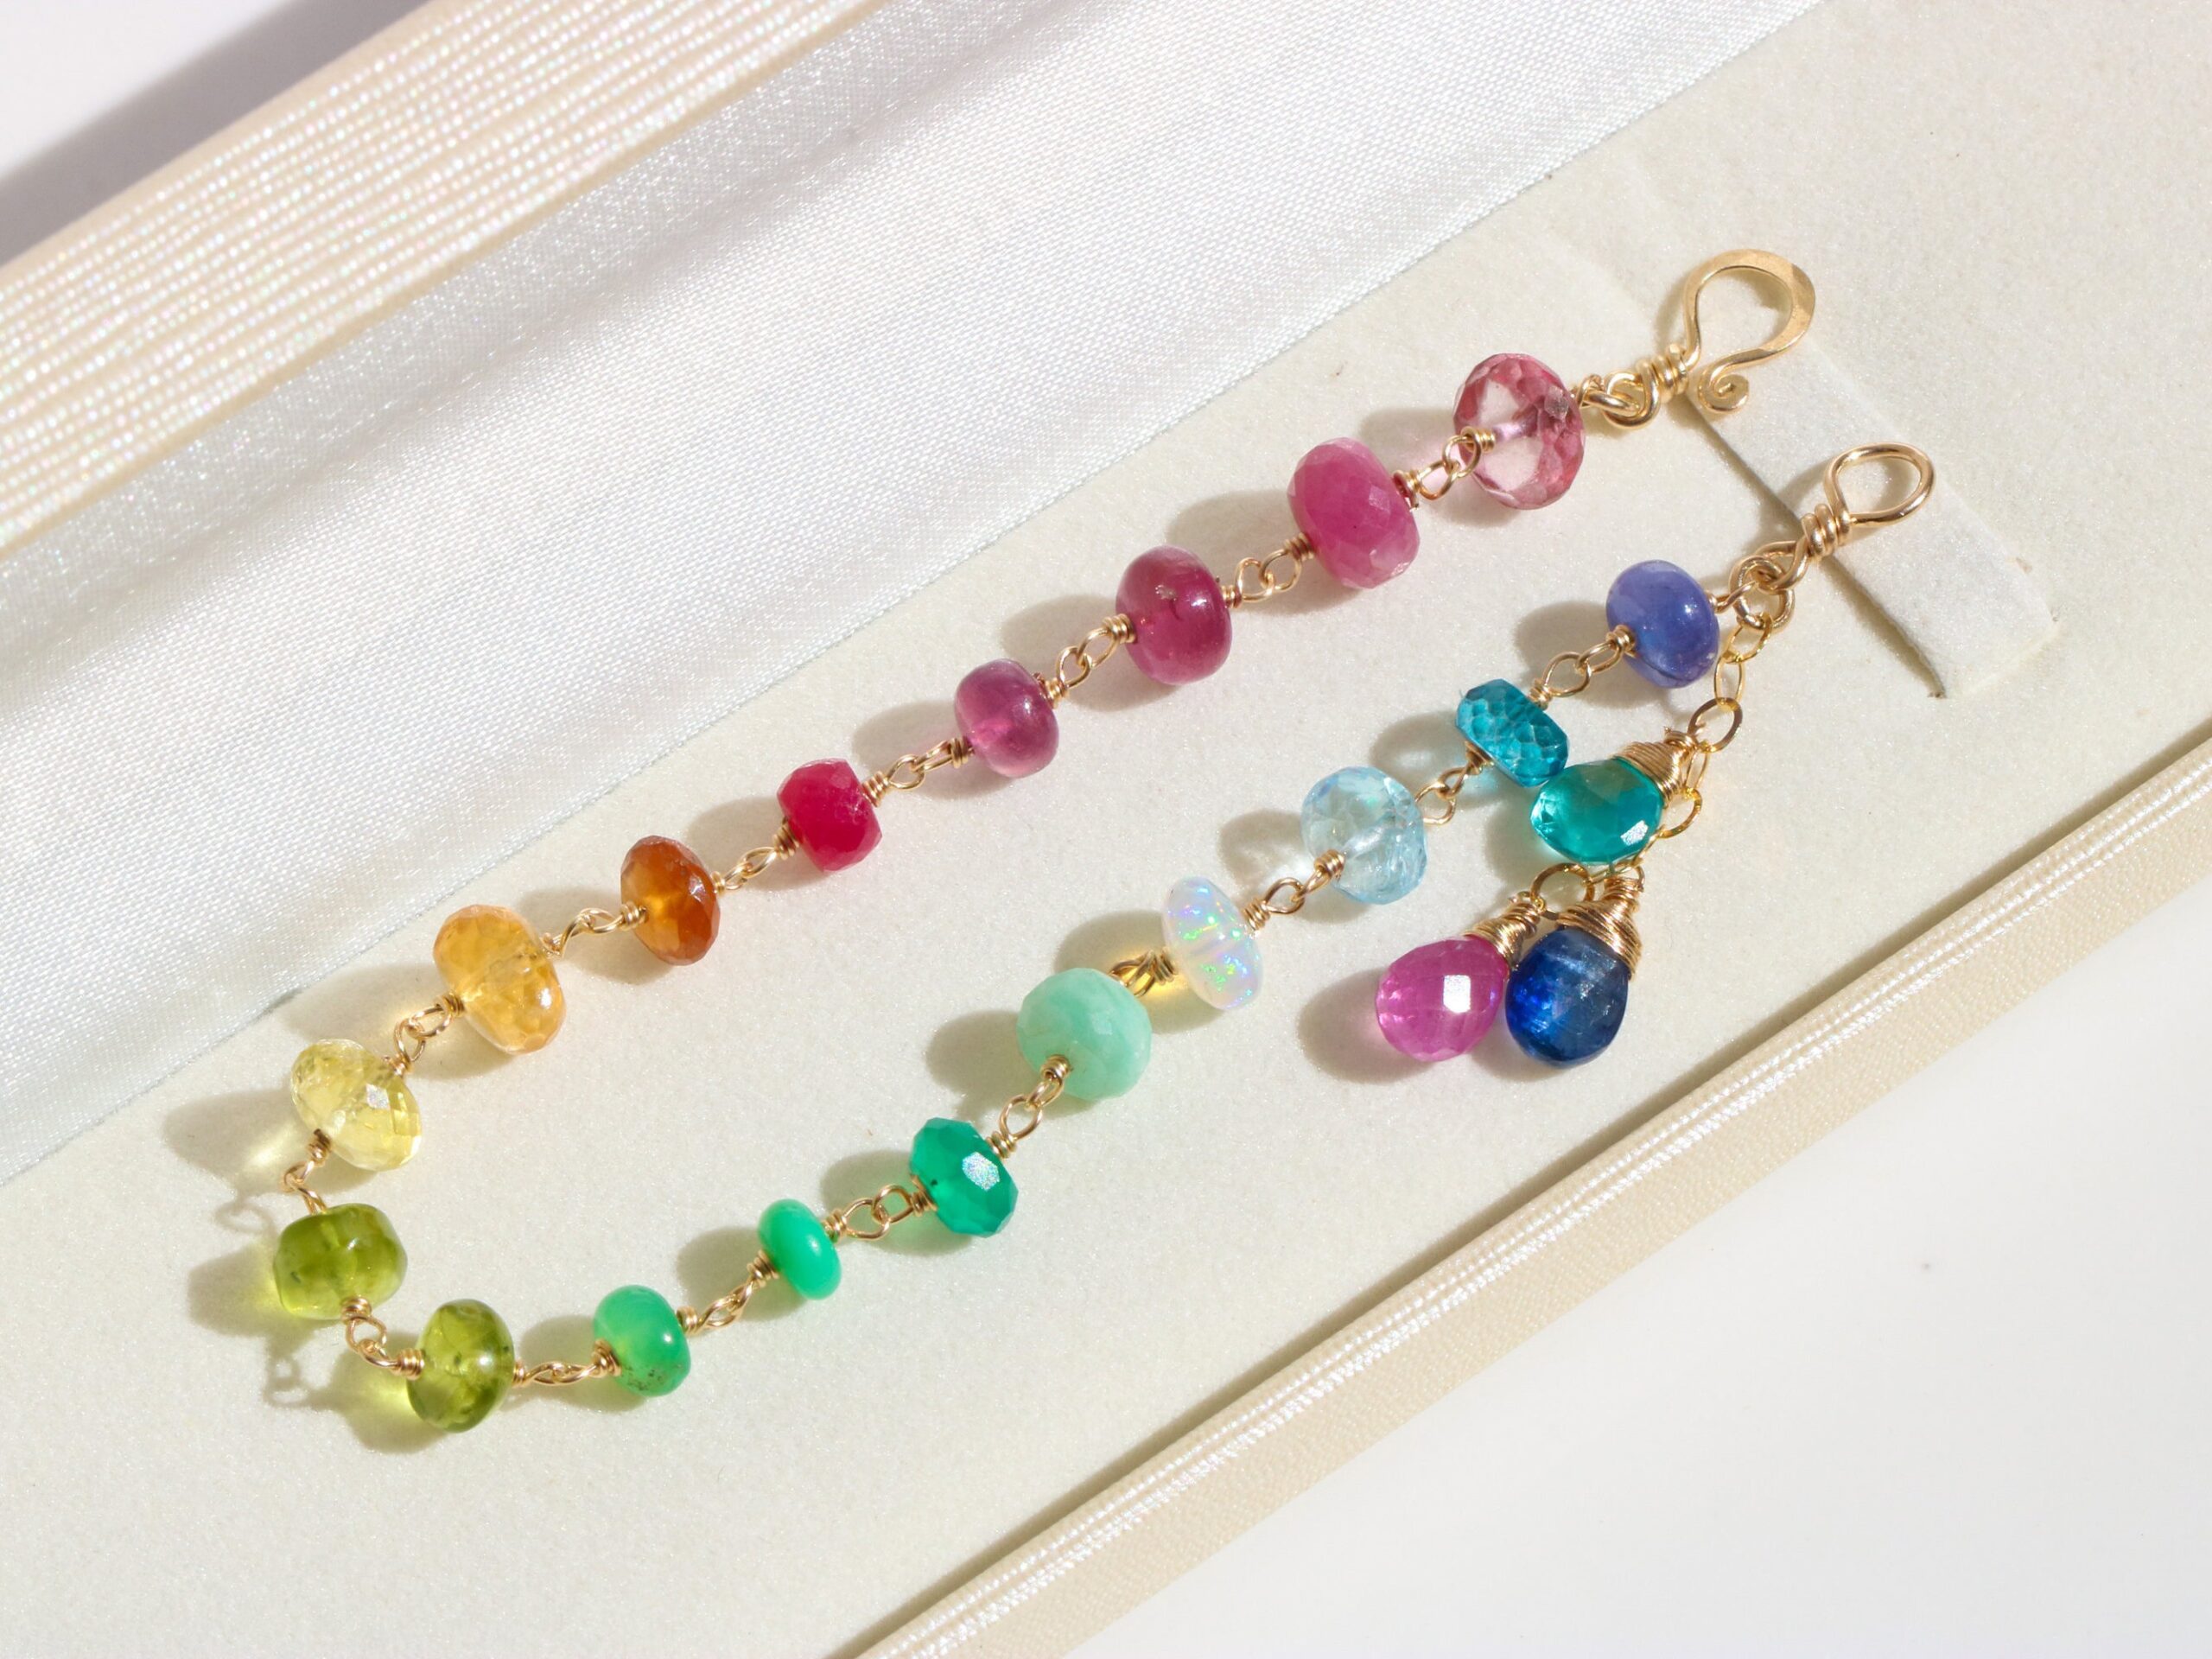 Rainbow Precious Gemstone Bracelet Wire Wrapped in Gold Filled